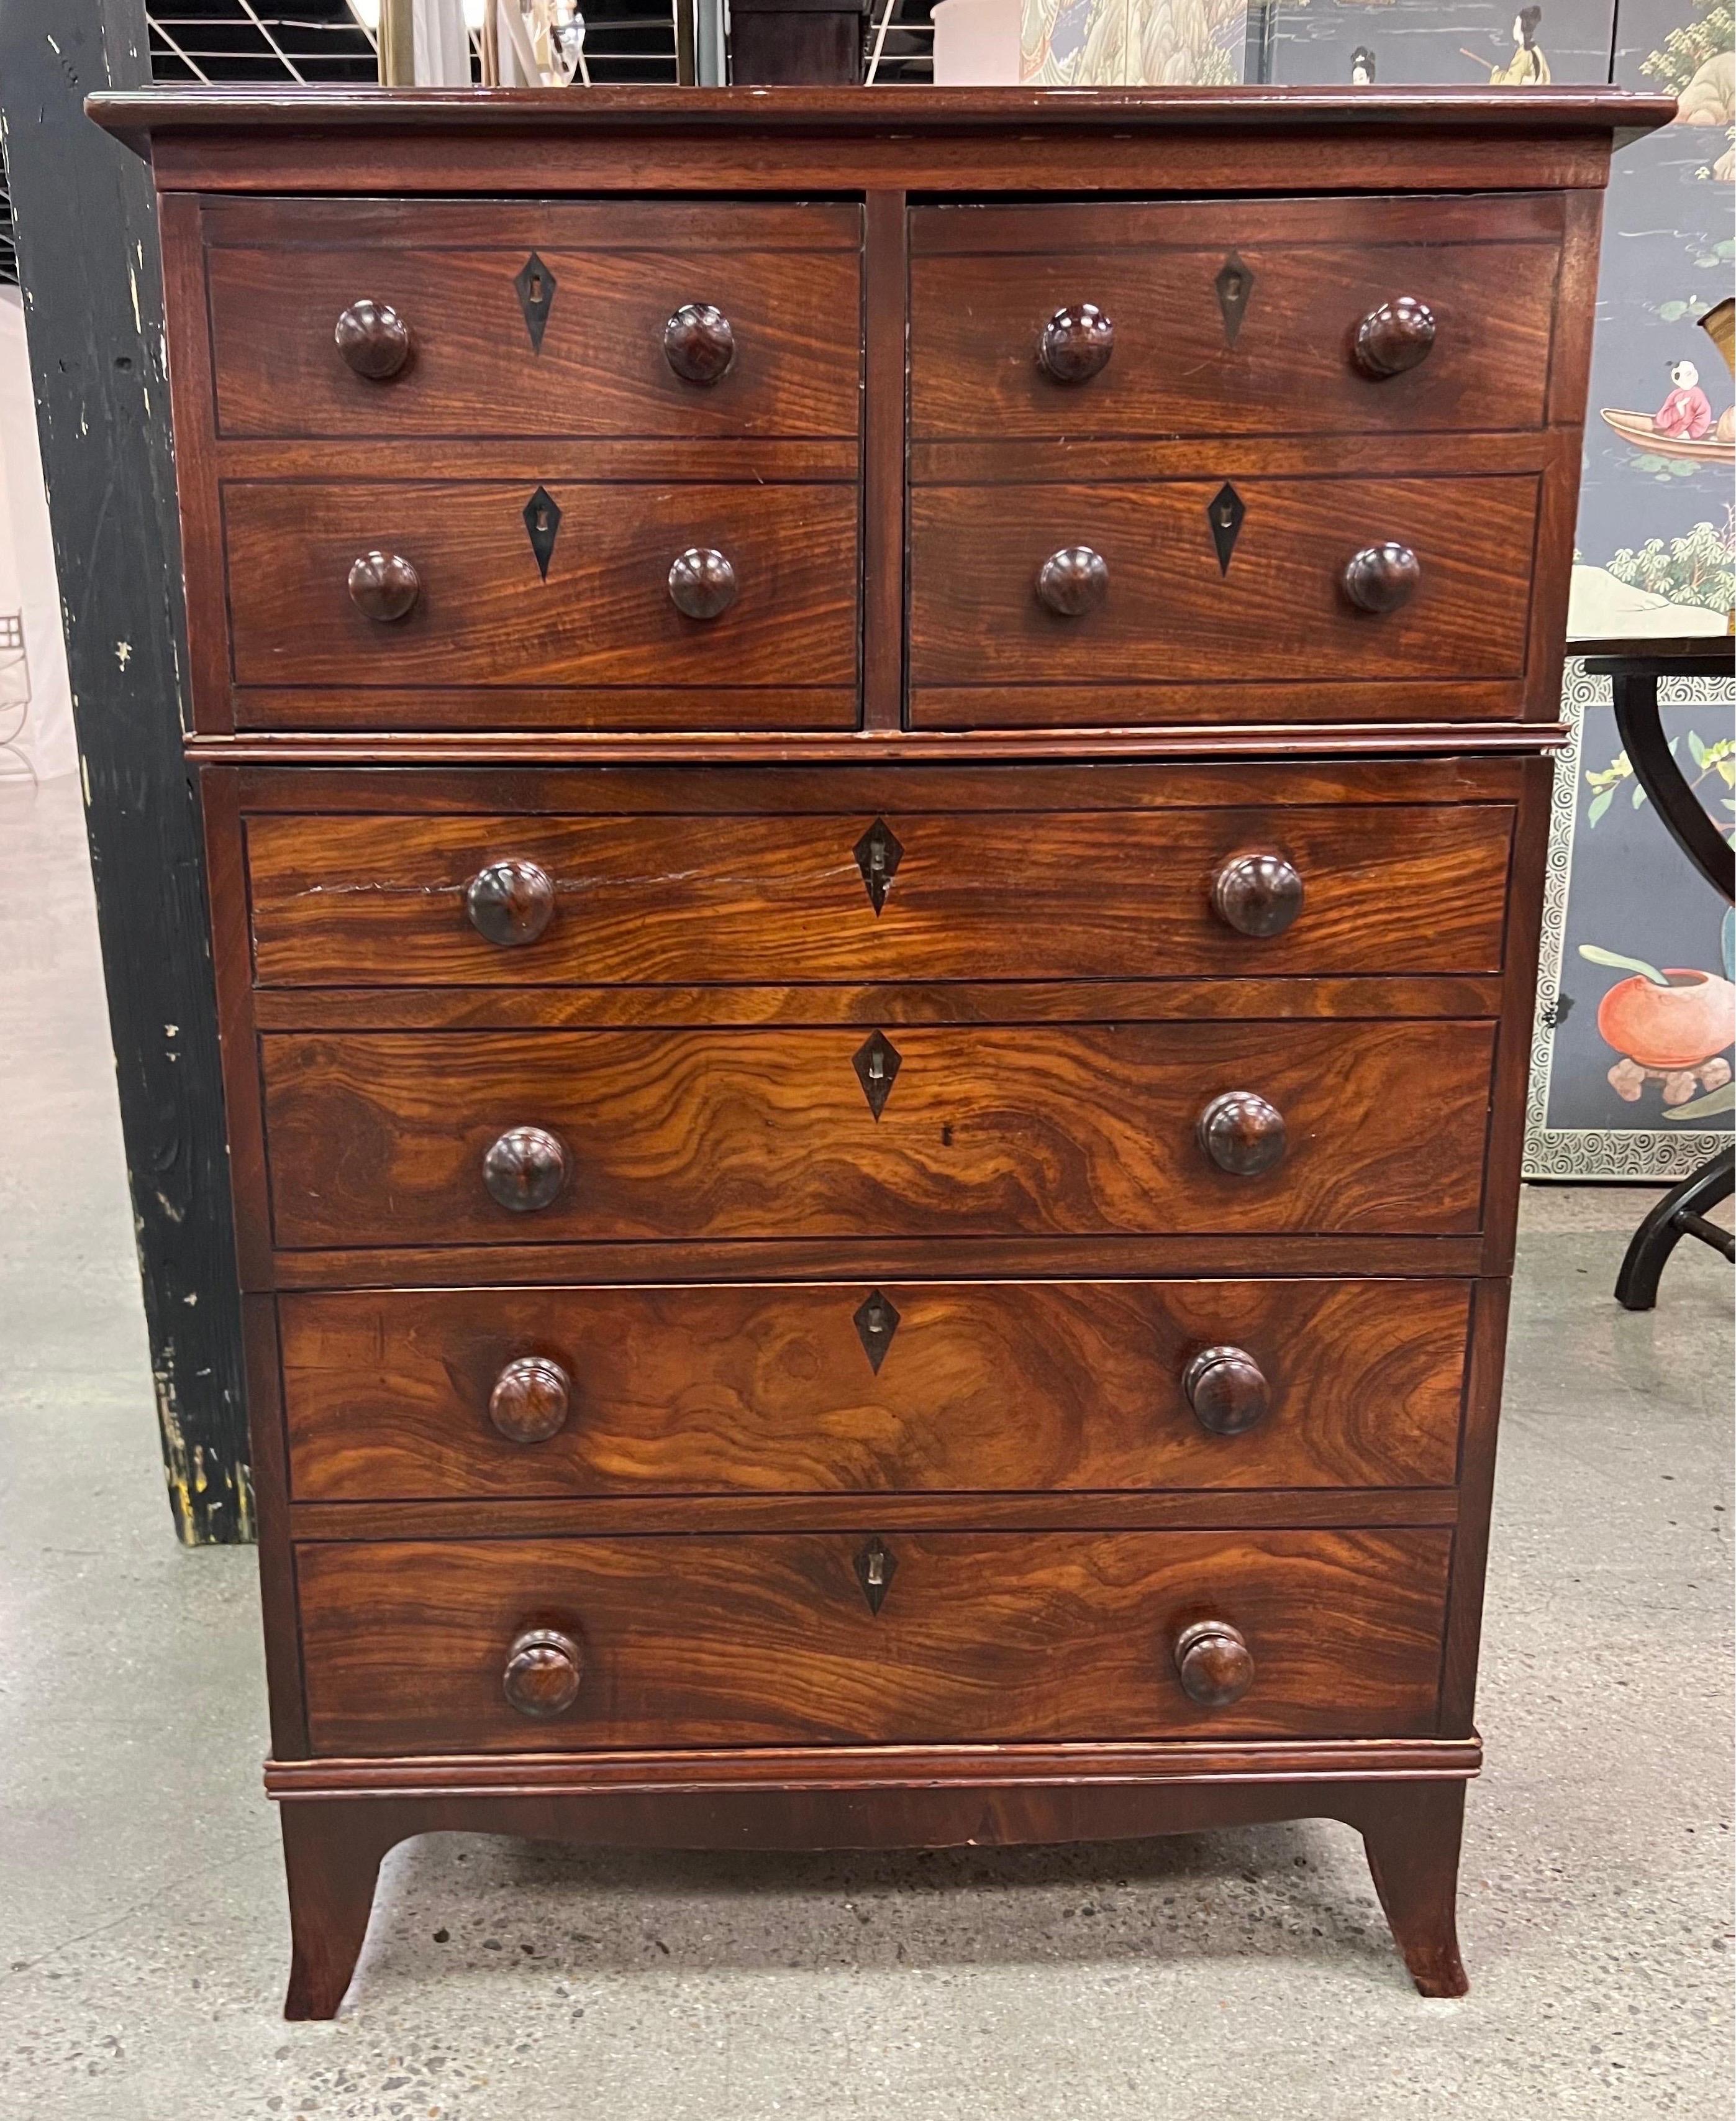 Handsome English Regency mahogany chest with ebonized details. This chest has two half drawers over two full drawers made to look like four half drawers over four full drawers. The eschuteons and border are ebonized and the piece sits on lovely